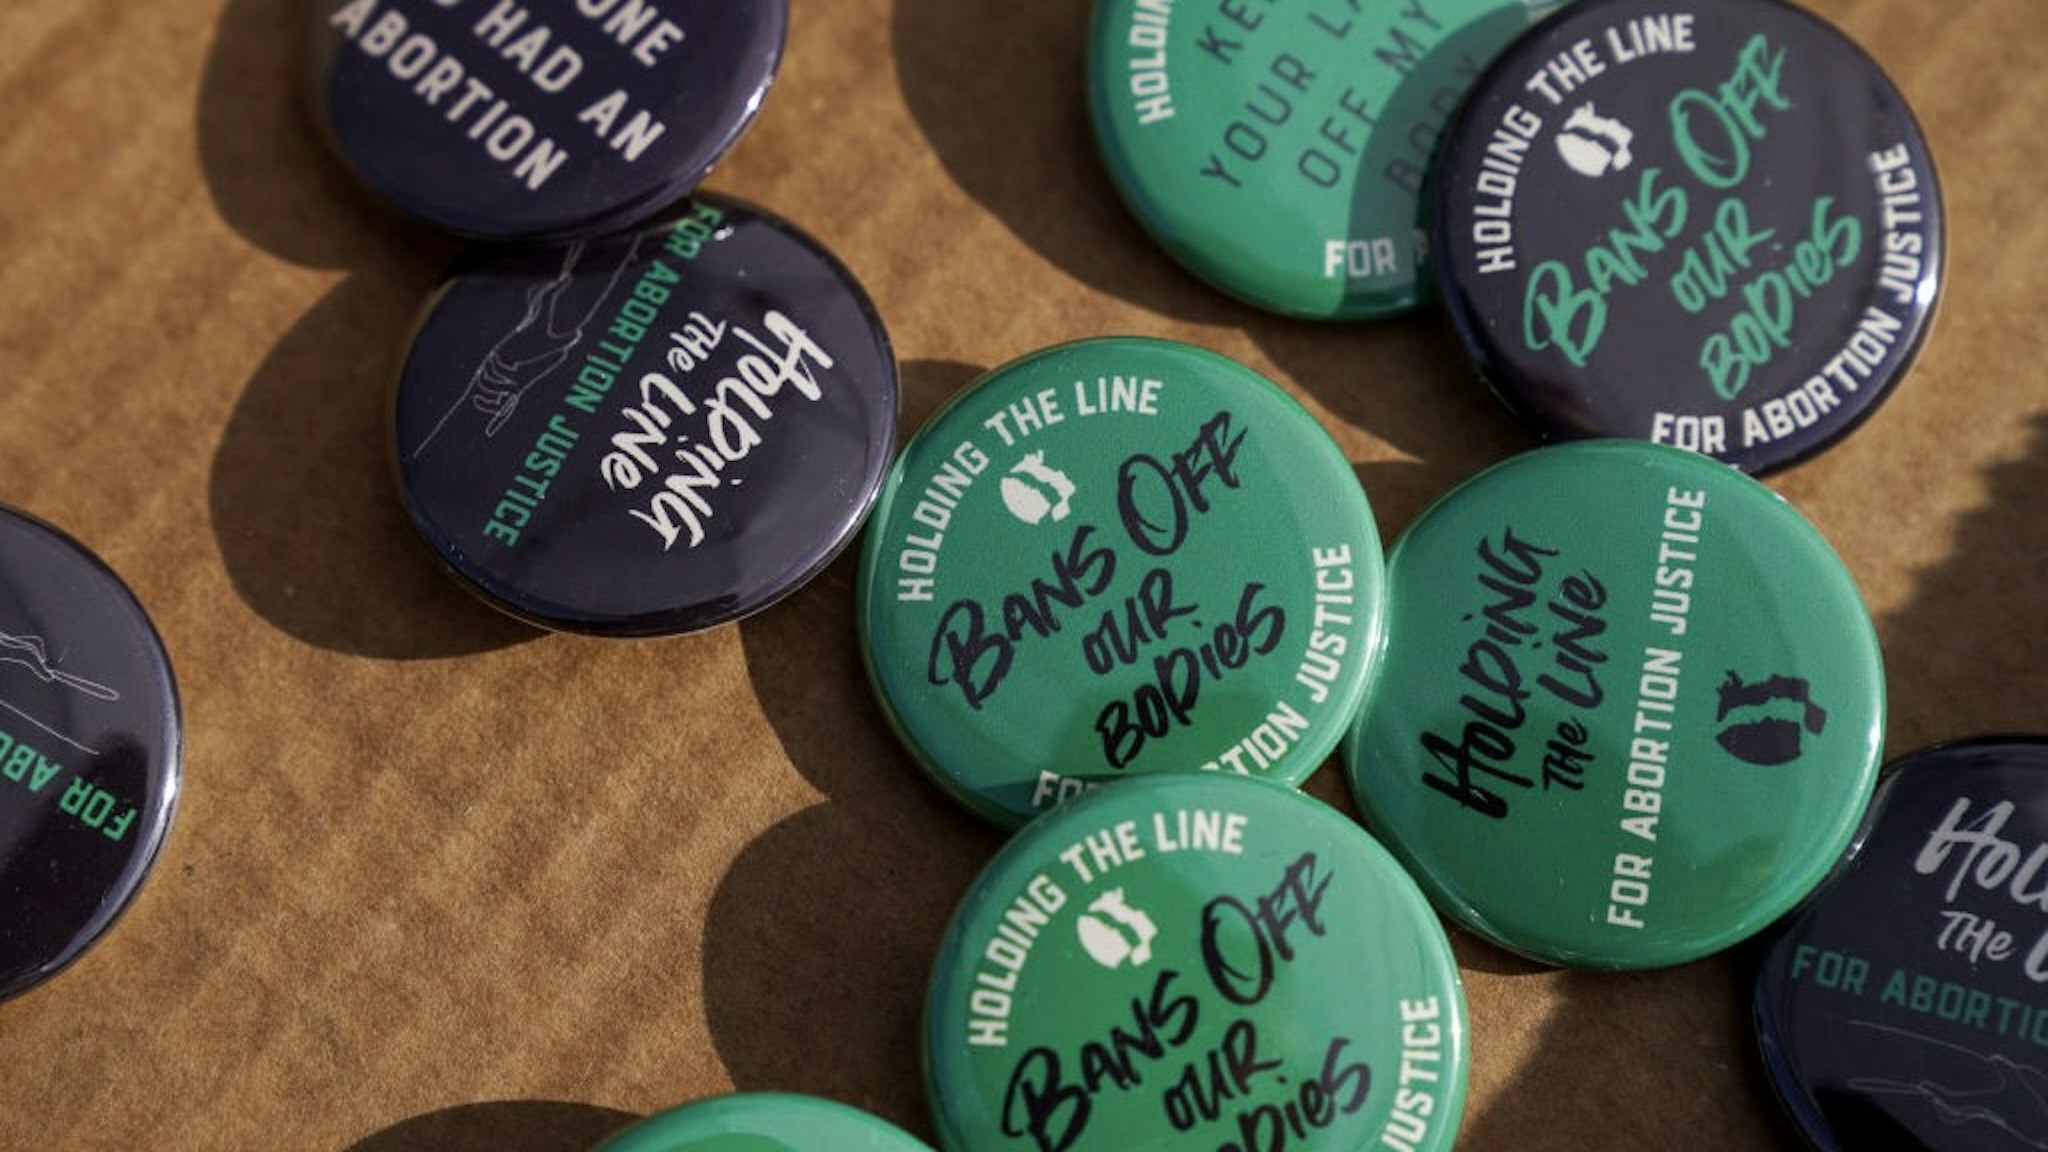 Women's March "Hold The Line For Abortion Justice" At The Supreme Court During Jackson Women's Health Organization v. Dobbs Hearing WASHINGTON, DC - DECEMBER 01: Buttons are given out during the Women's March "Hold The Line For Abortion Justice" at Union Station on December 01, 2021 in Washington, DC. (Photo by Leigh Vogel/Getty Images for Women's March Inc) Leigh Vogel / Stringer